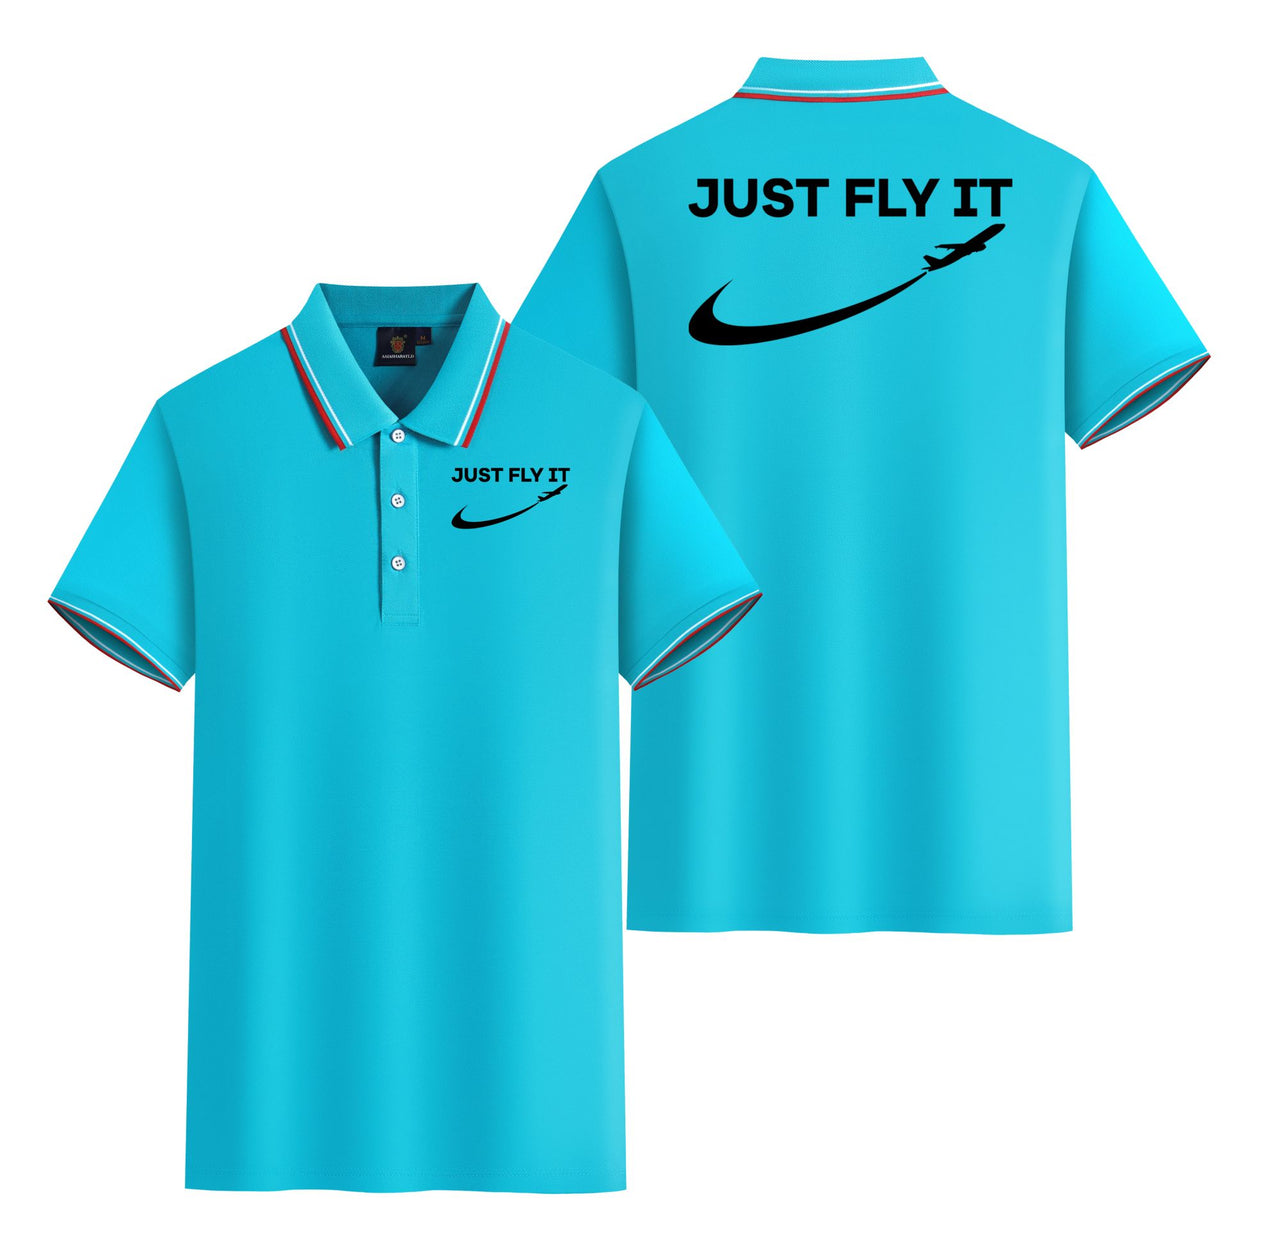 Just Fly It 2 Designed Stylish Polo T-Shirts (Double-Side)